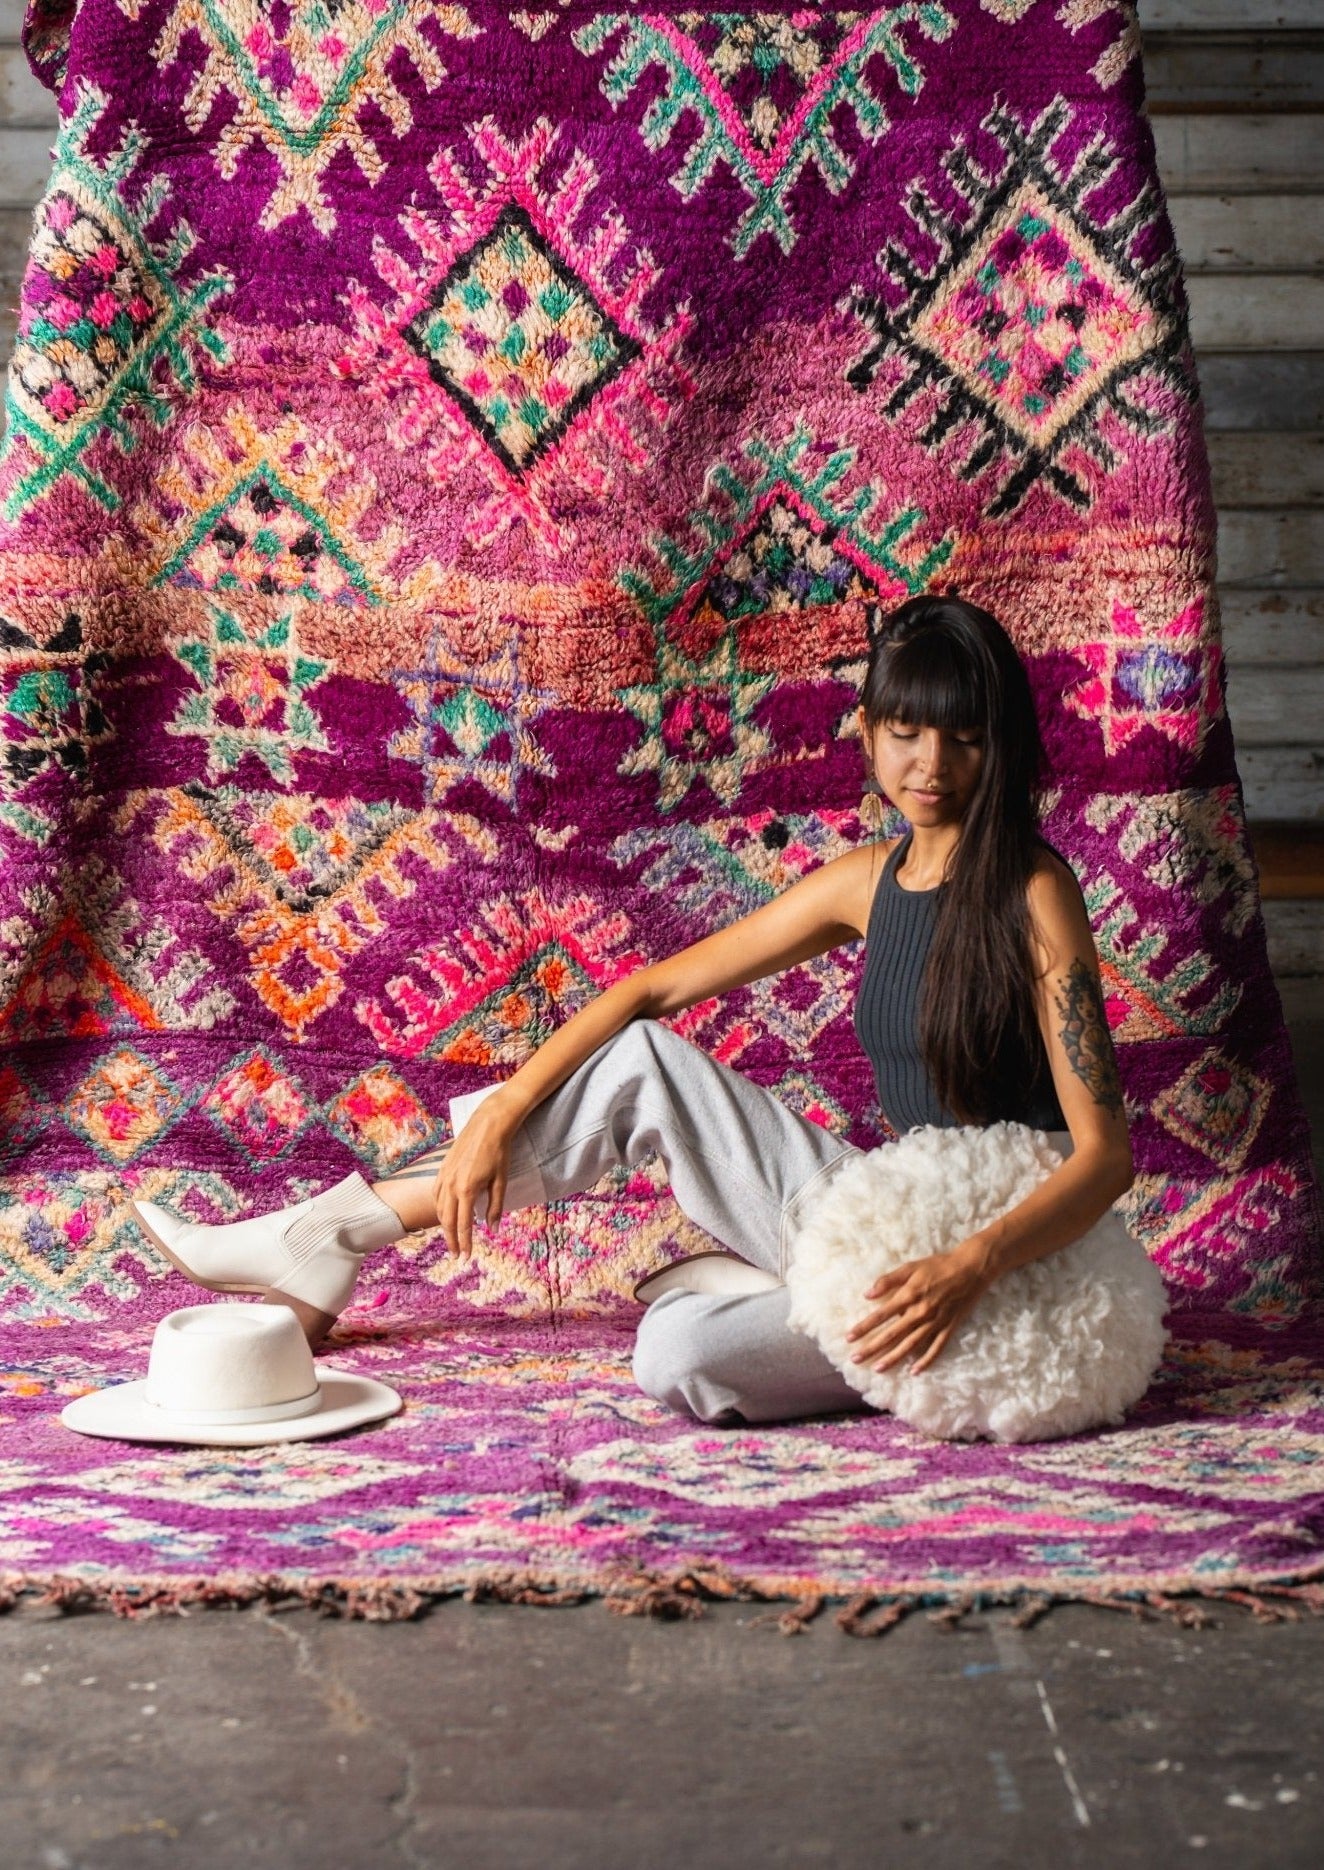 dramatic studio light shows off the color in the rug and highlights the berber motifs. girl sits relaxed on rug holding a sheeps wool round pillow. 